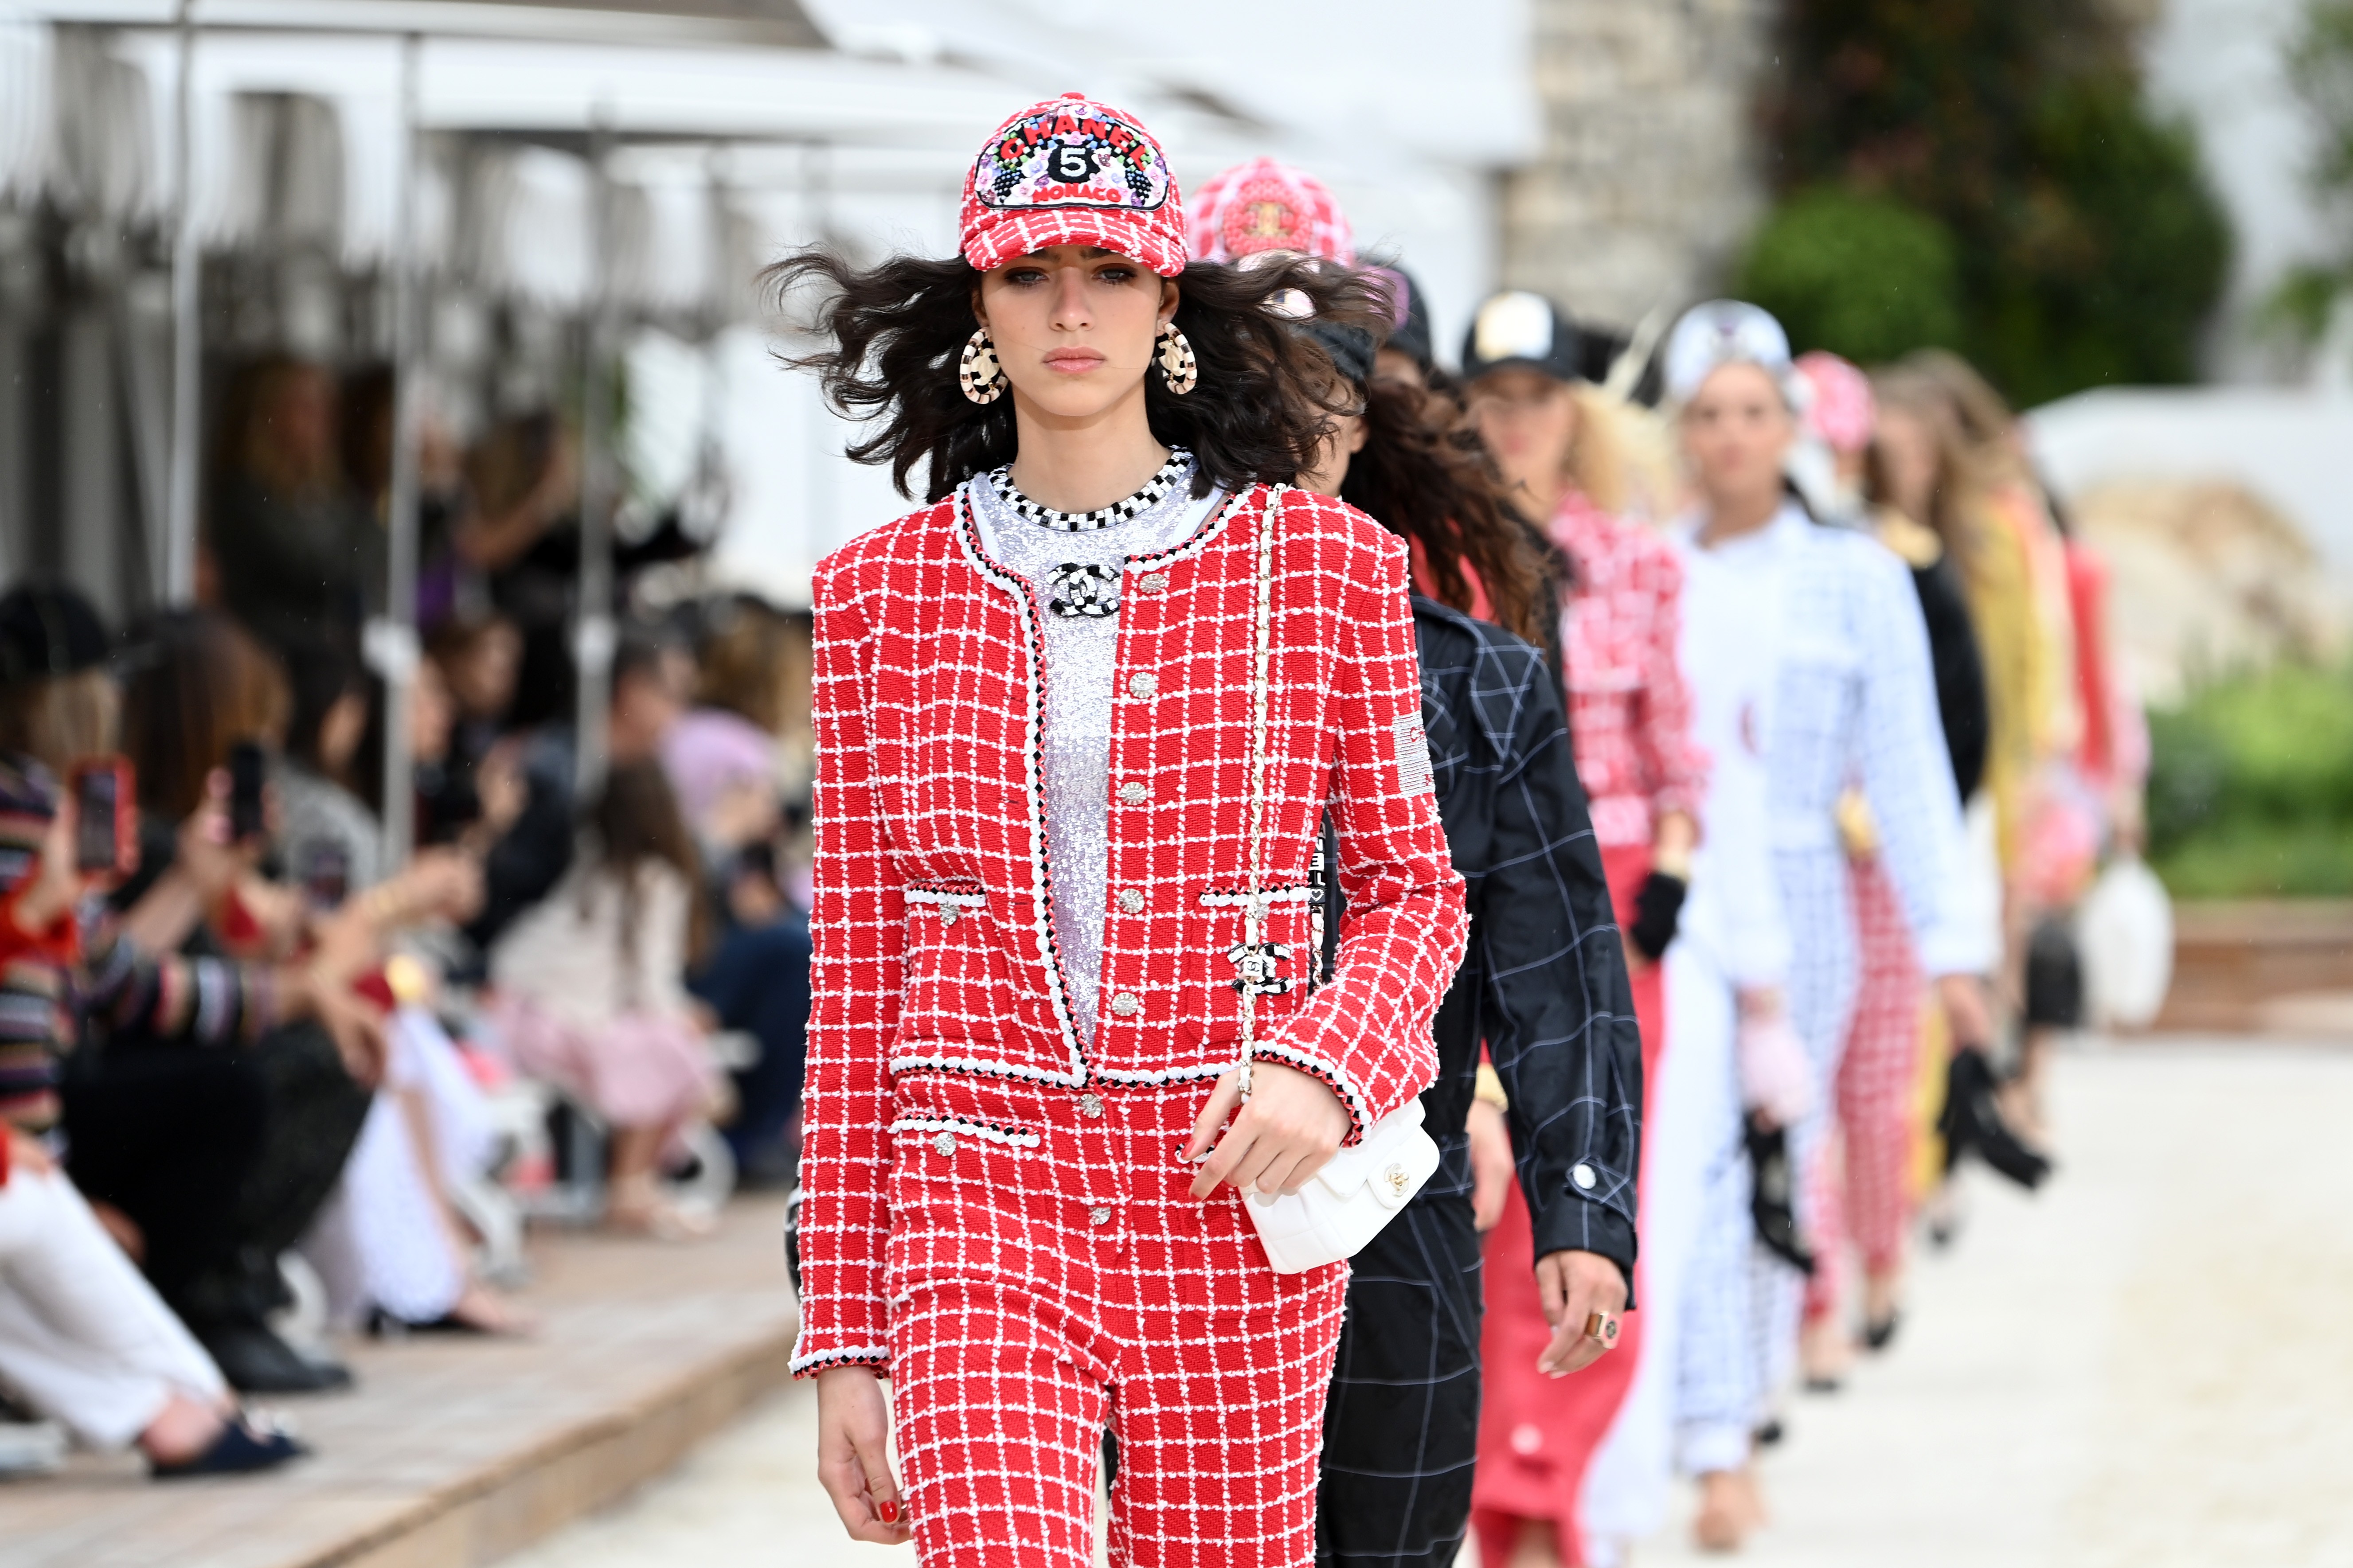 Chanel Cruise show in Monte Carlo (Photo: Getty Images)